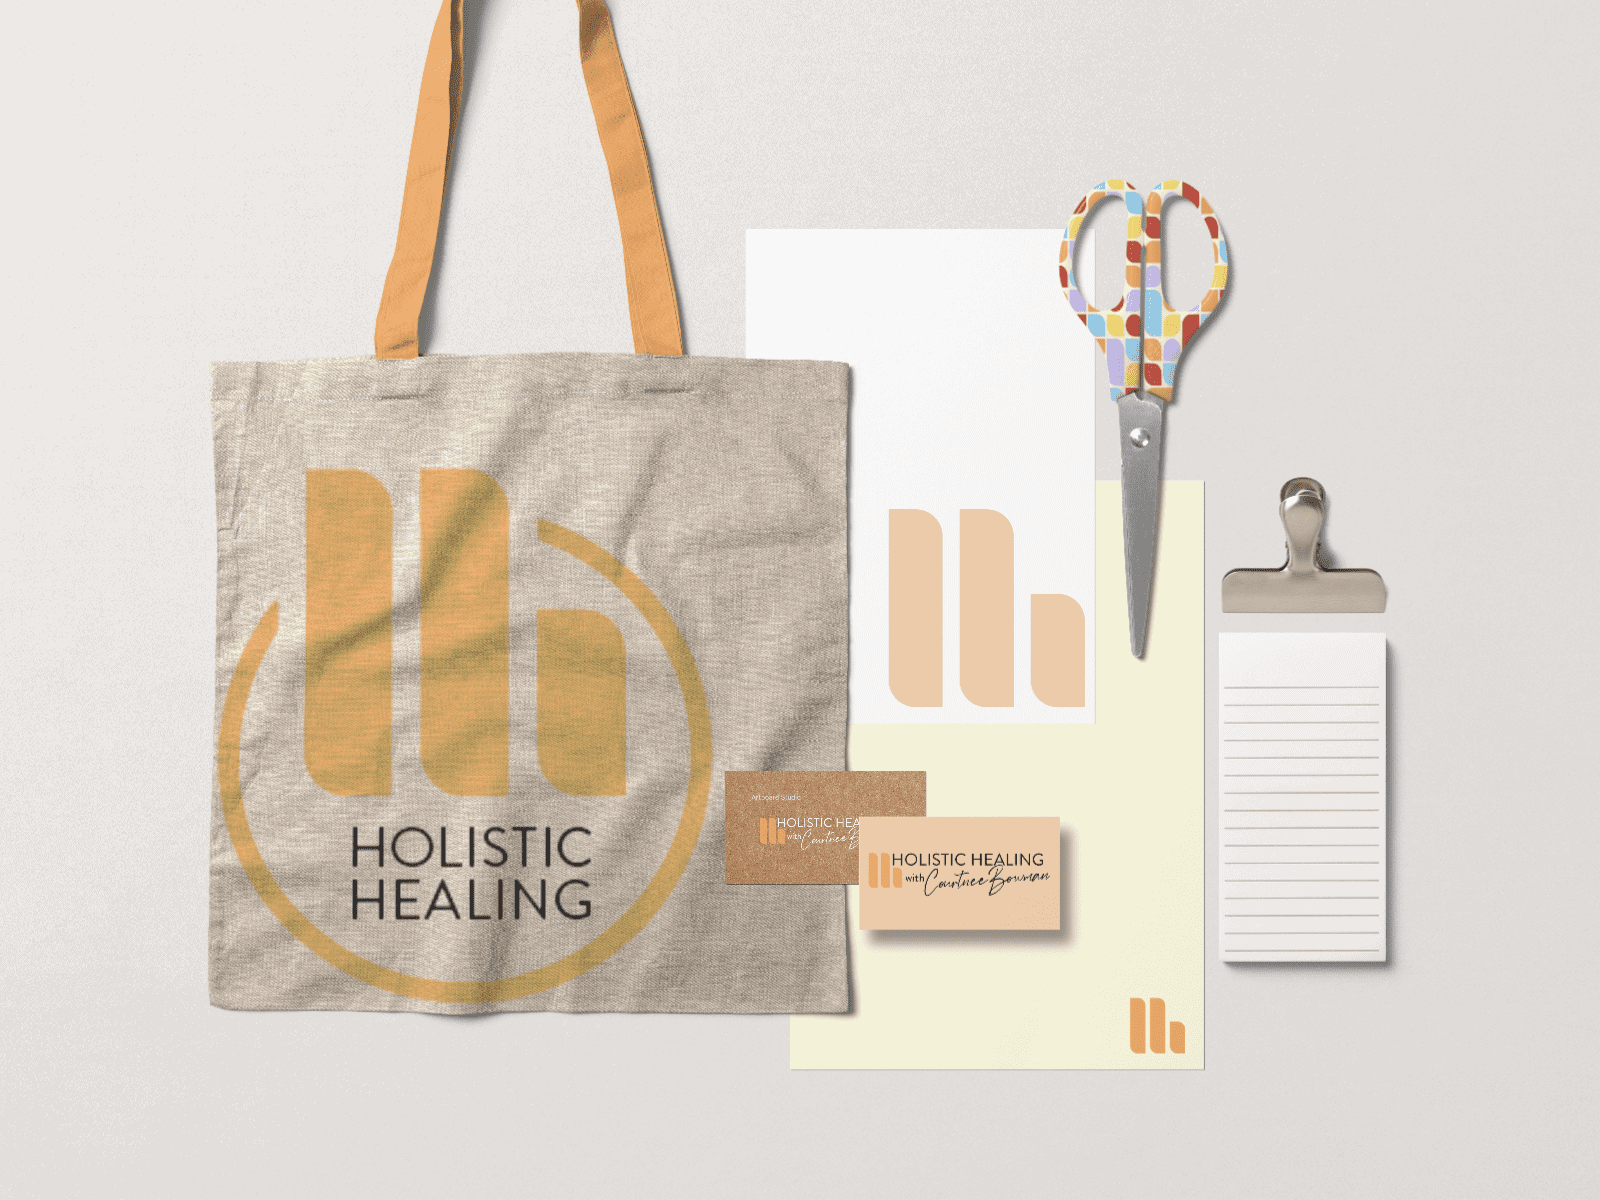 A collection of branded items for Holistic Healing is shown, including a beige tote bag, a pair of scissors with a colorful handle, a business card, a letterhead, a notepad, and a clipboard. The items feature a logo with the letter "H" in an orange and beige color scheme. - Market Design Team: Define. Structure. Expand.